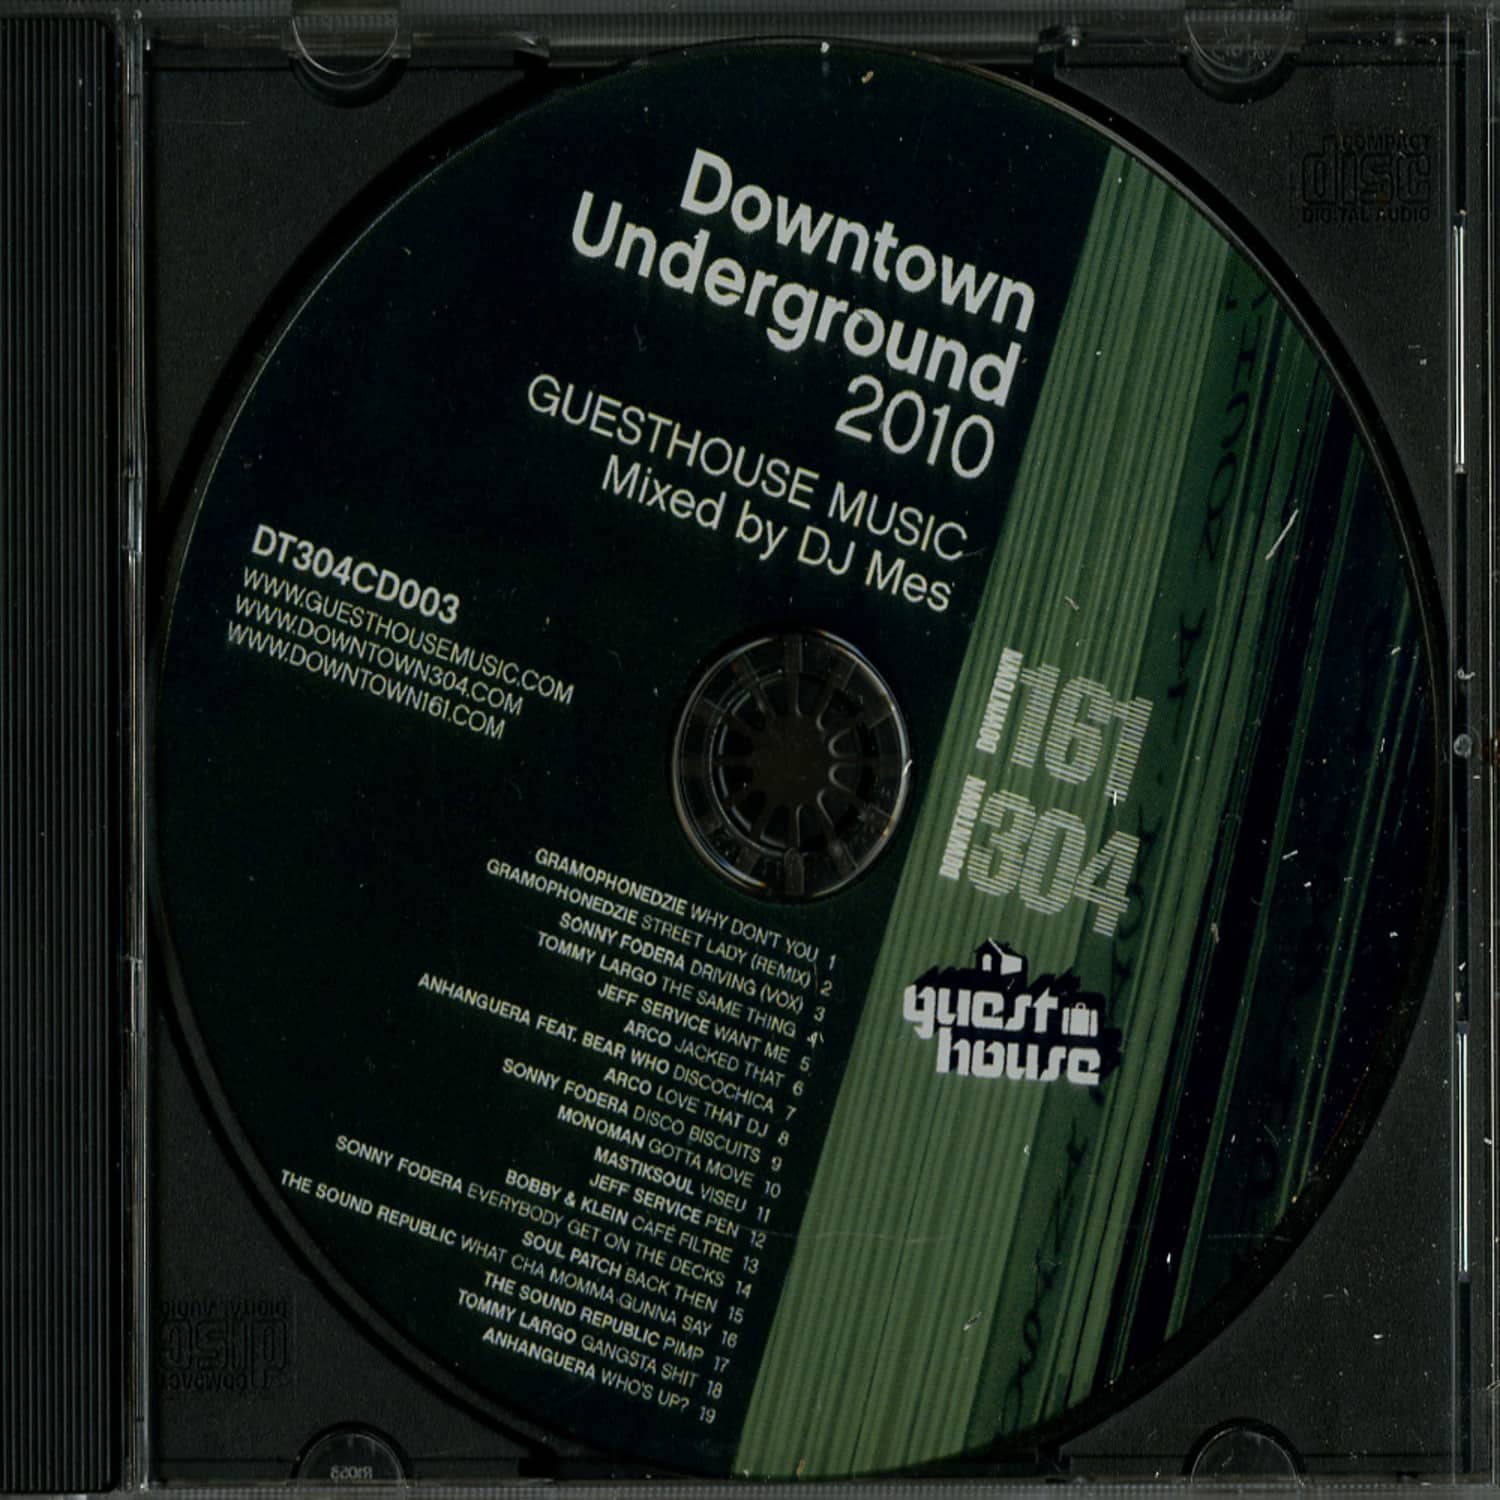 Downtown Undeground 2010 - GUESTHOUSE MUSIC, MIXED BY DJ MES 